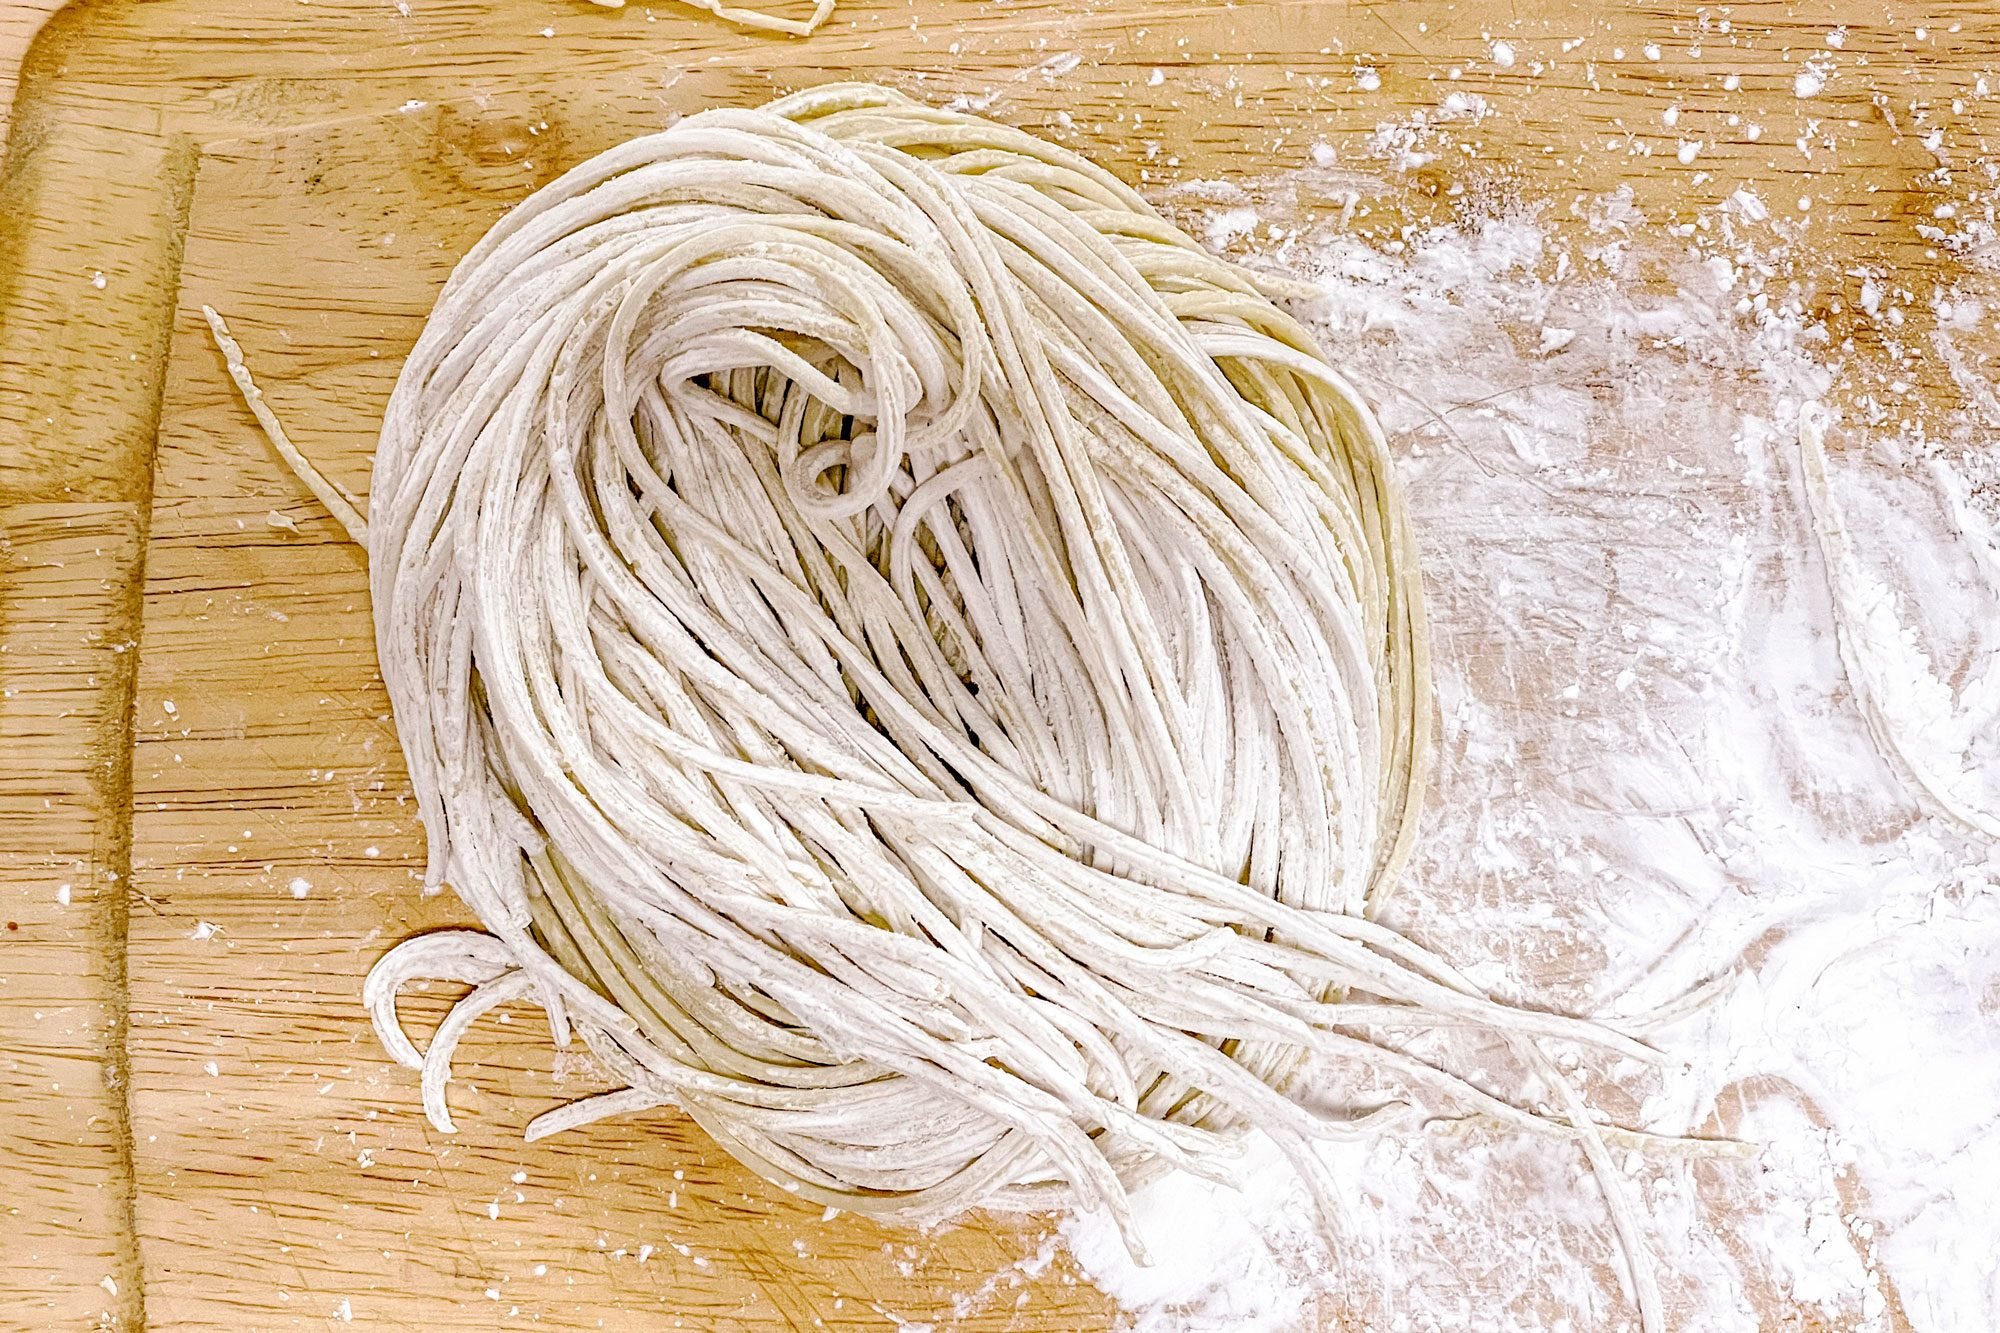 https://www.tasteofhome.com/wp-content/uploads/2023/02/How-to-Make-Ramen-Noodles-from-Scratch-4-Ingredients_img_3173_Suzanne-Podhaizer-for-Taste-of-Home_MLedit.jpg